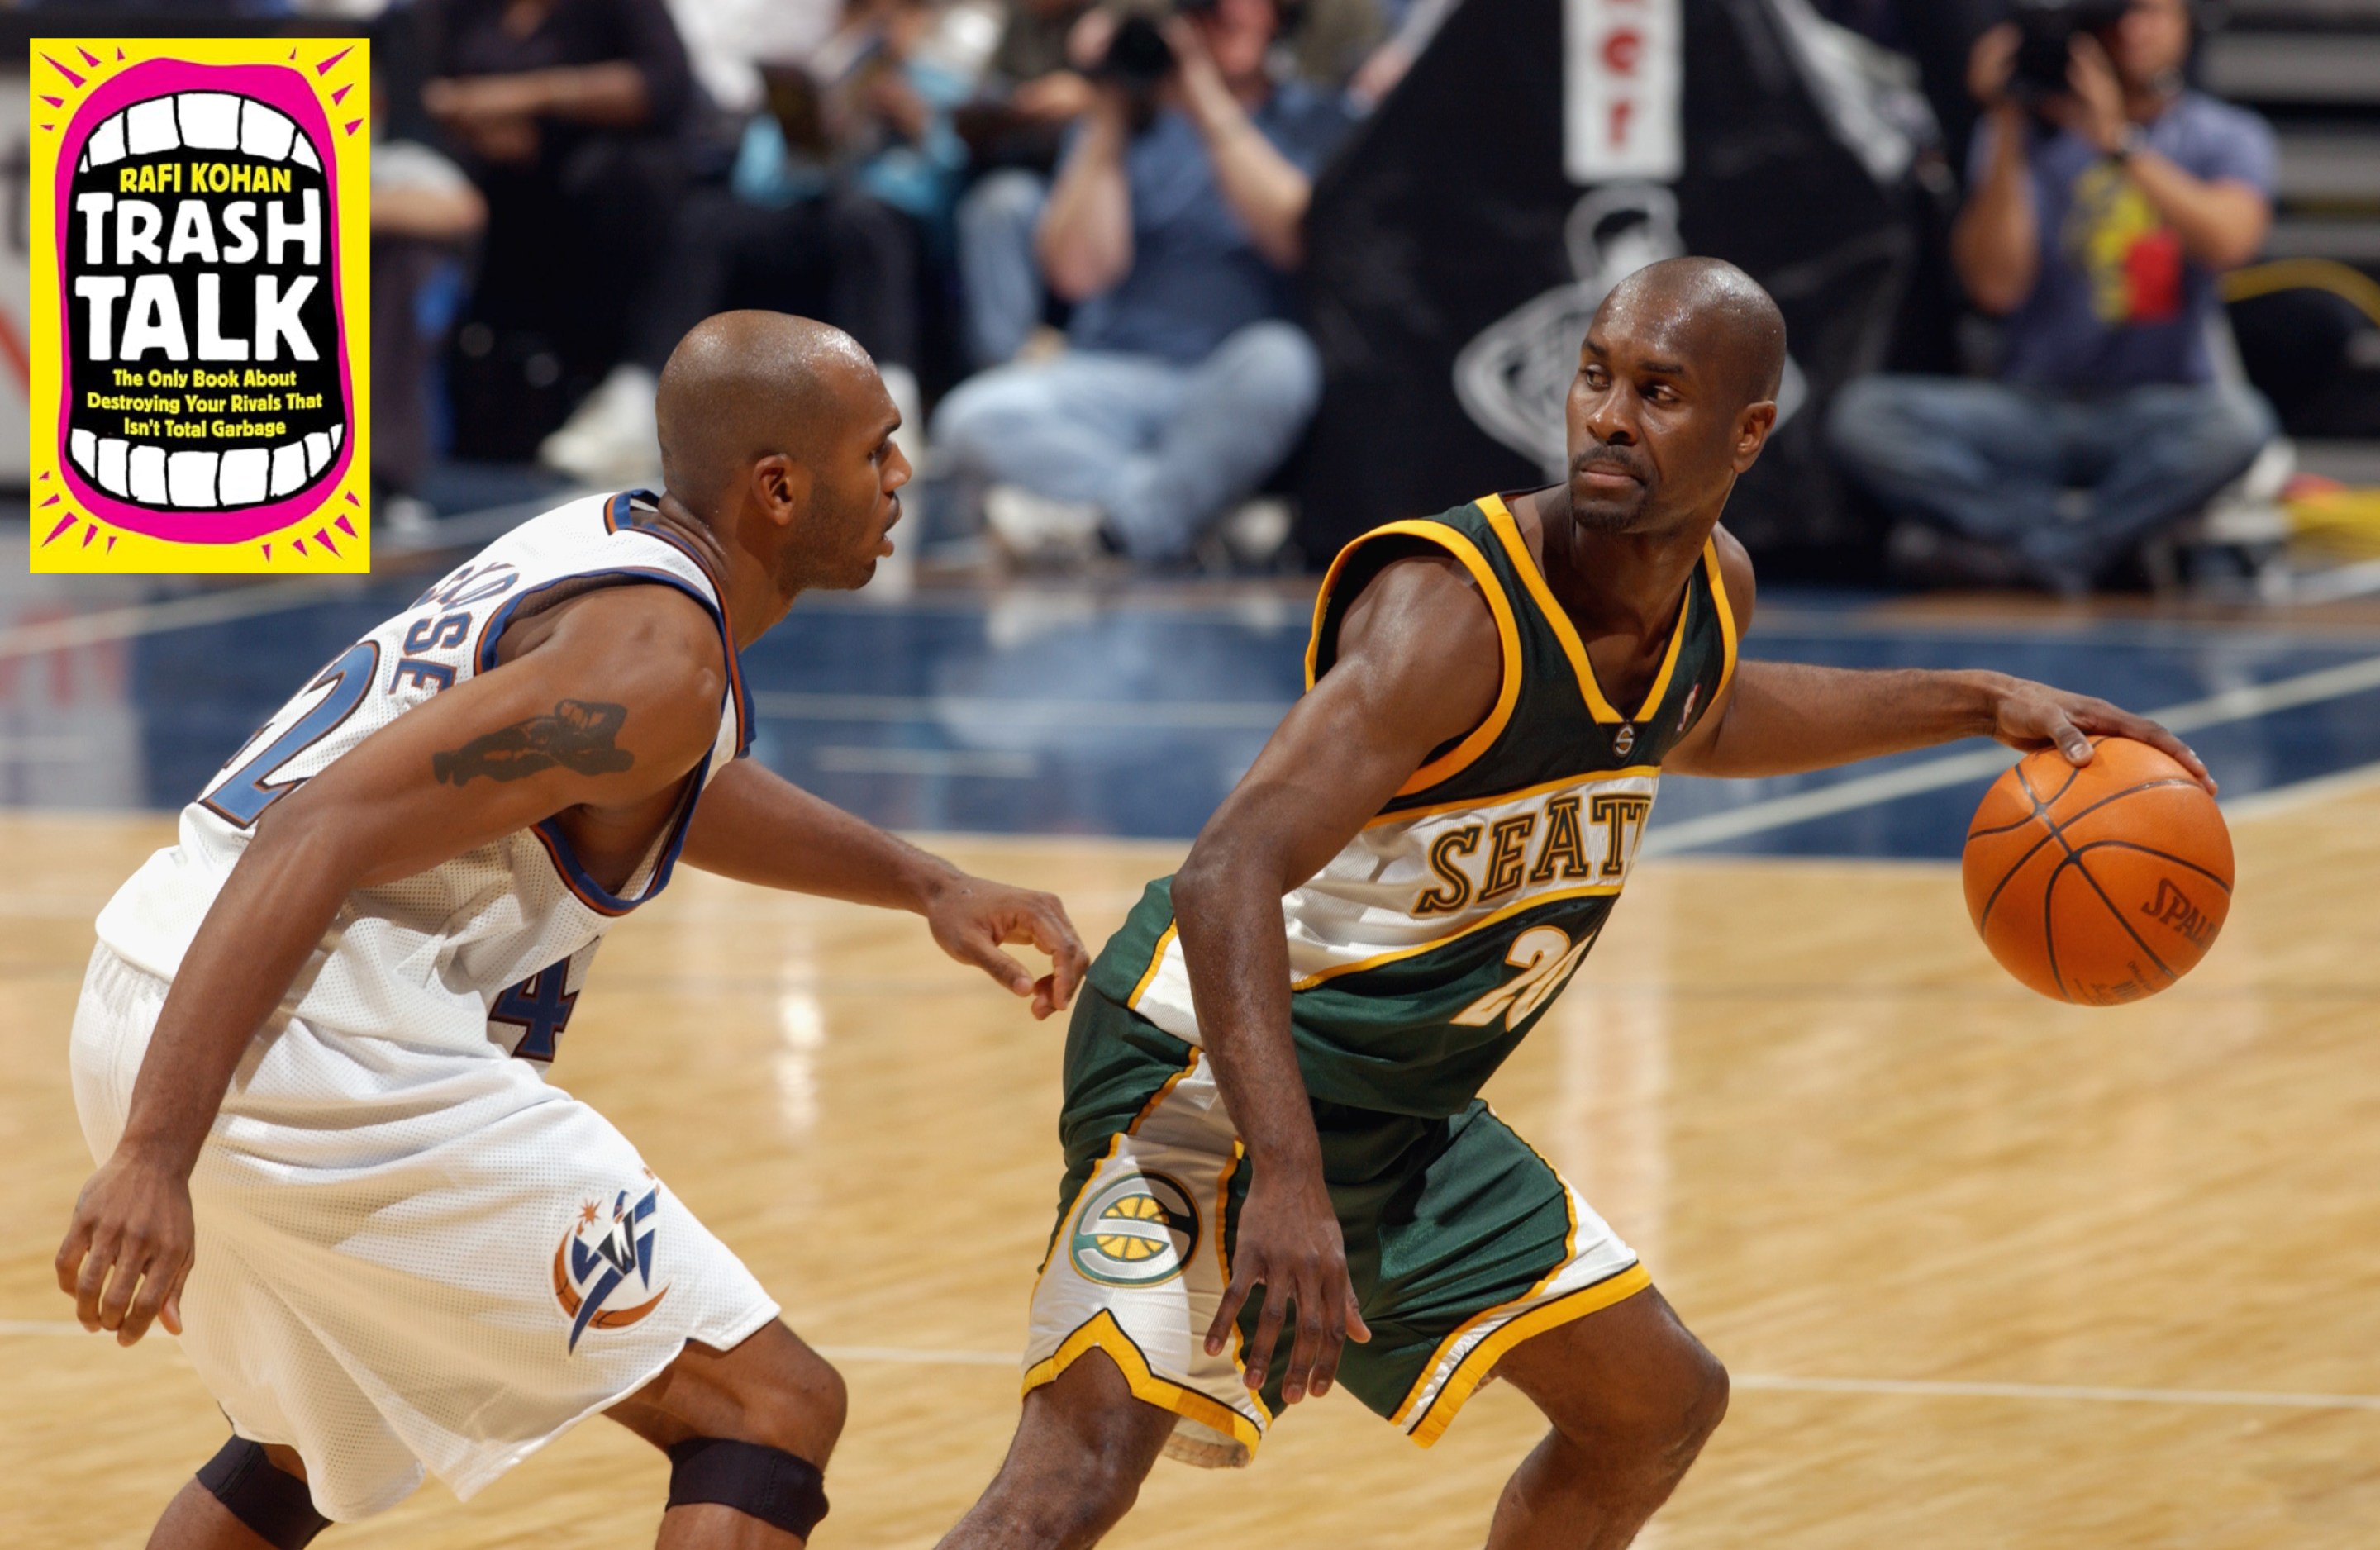 Gary Payton of the Seattle SuperSonics sneering disdainfully at Jerry Stackhouse, who is trying to guard him in 2002. The cover of Rafi Kohan's book "Trash Talk" is at upper left.